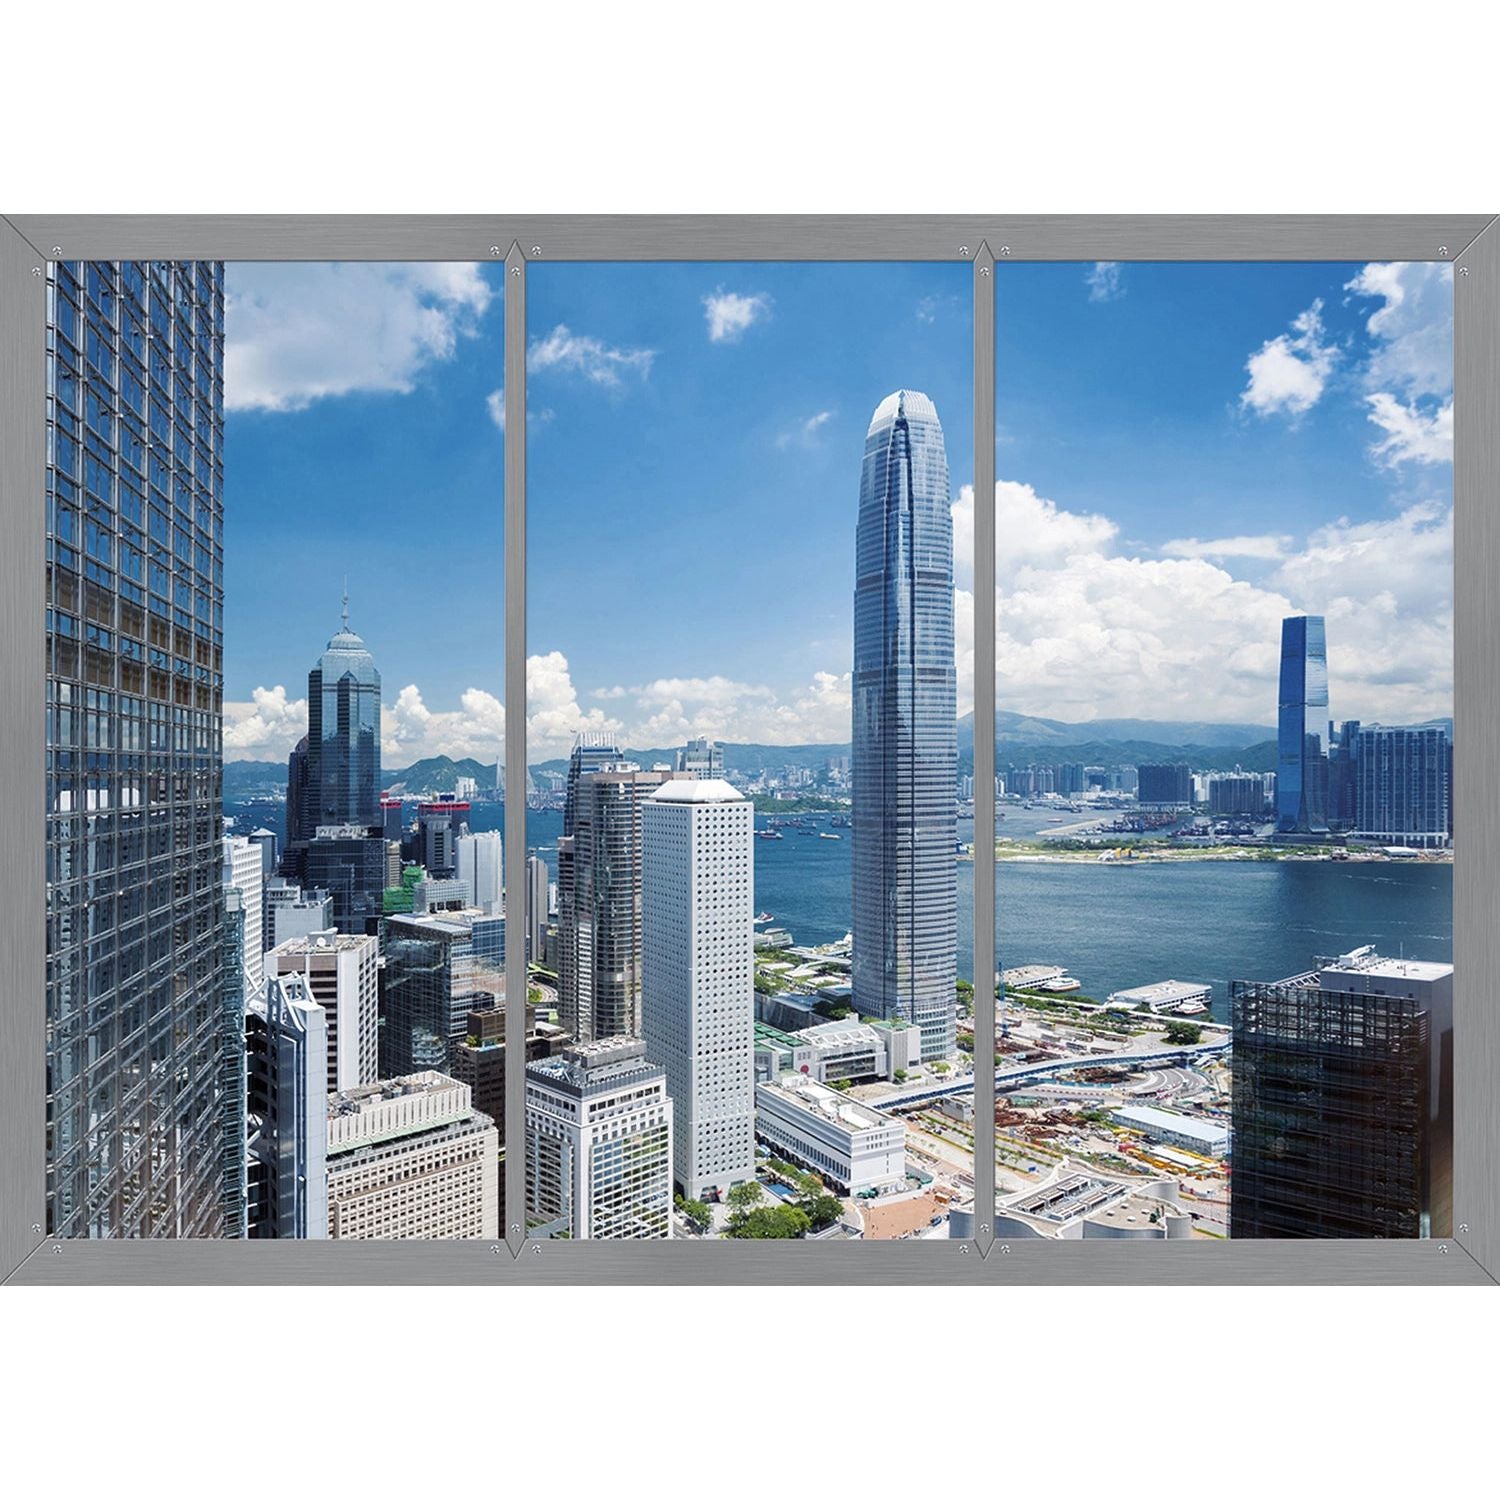 Skyline Reflections: Urban Waterfront Wall Mural